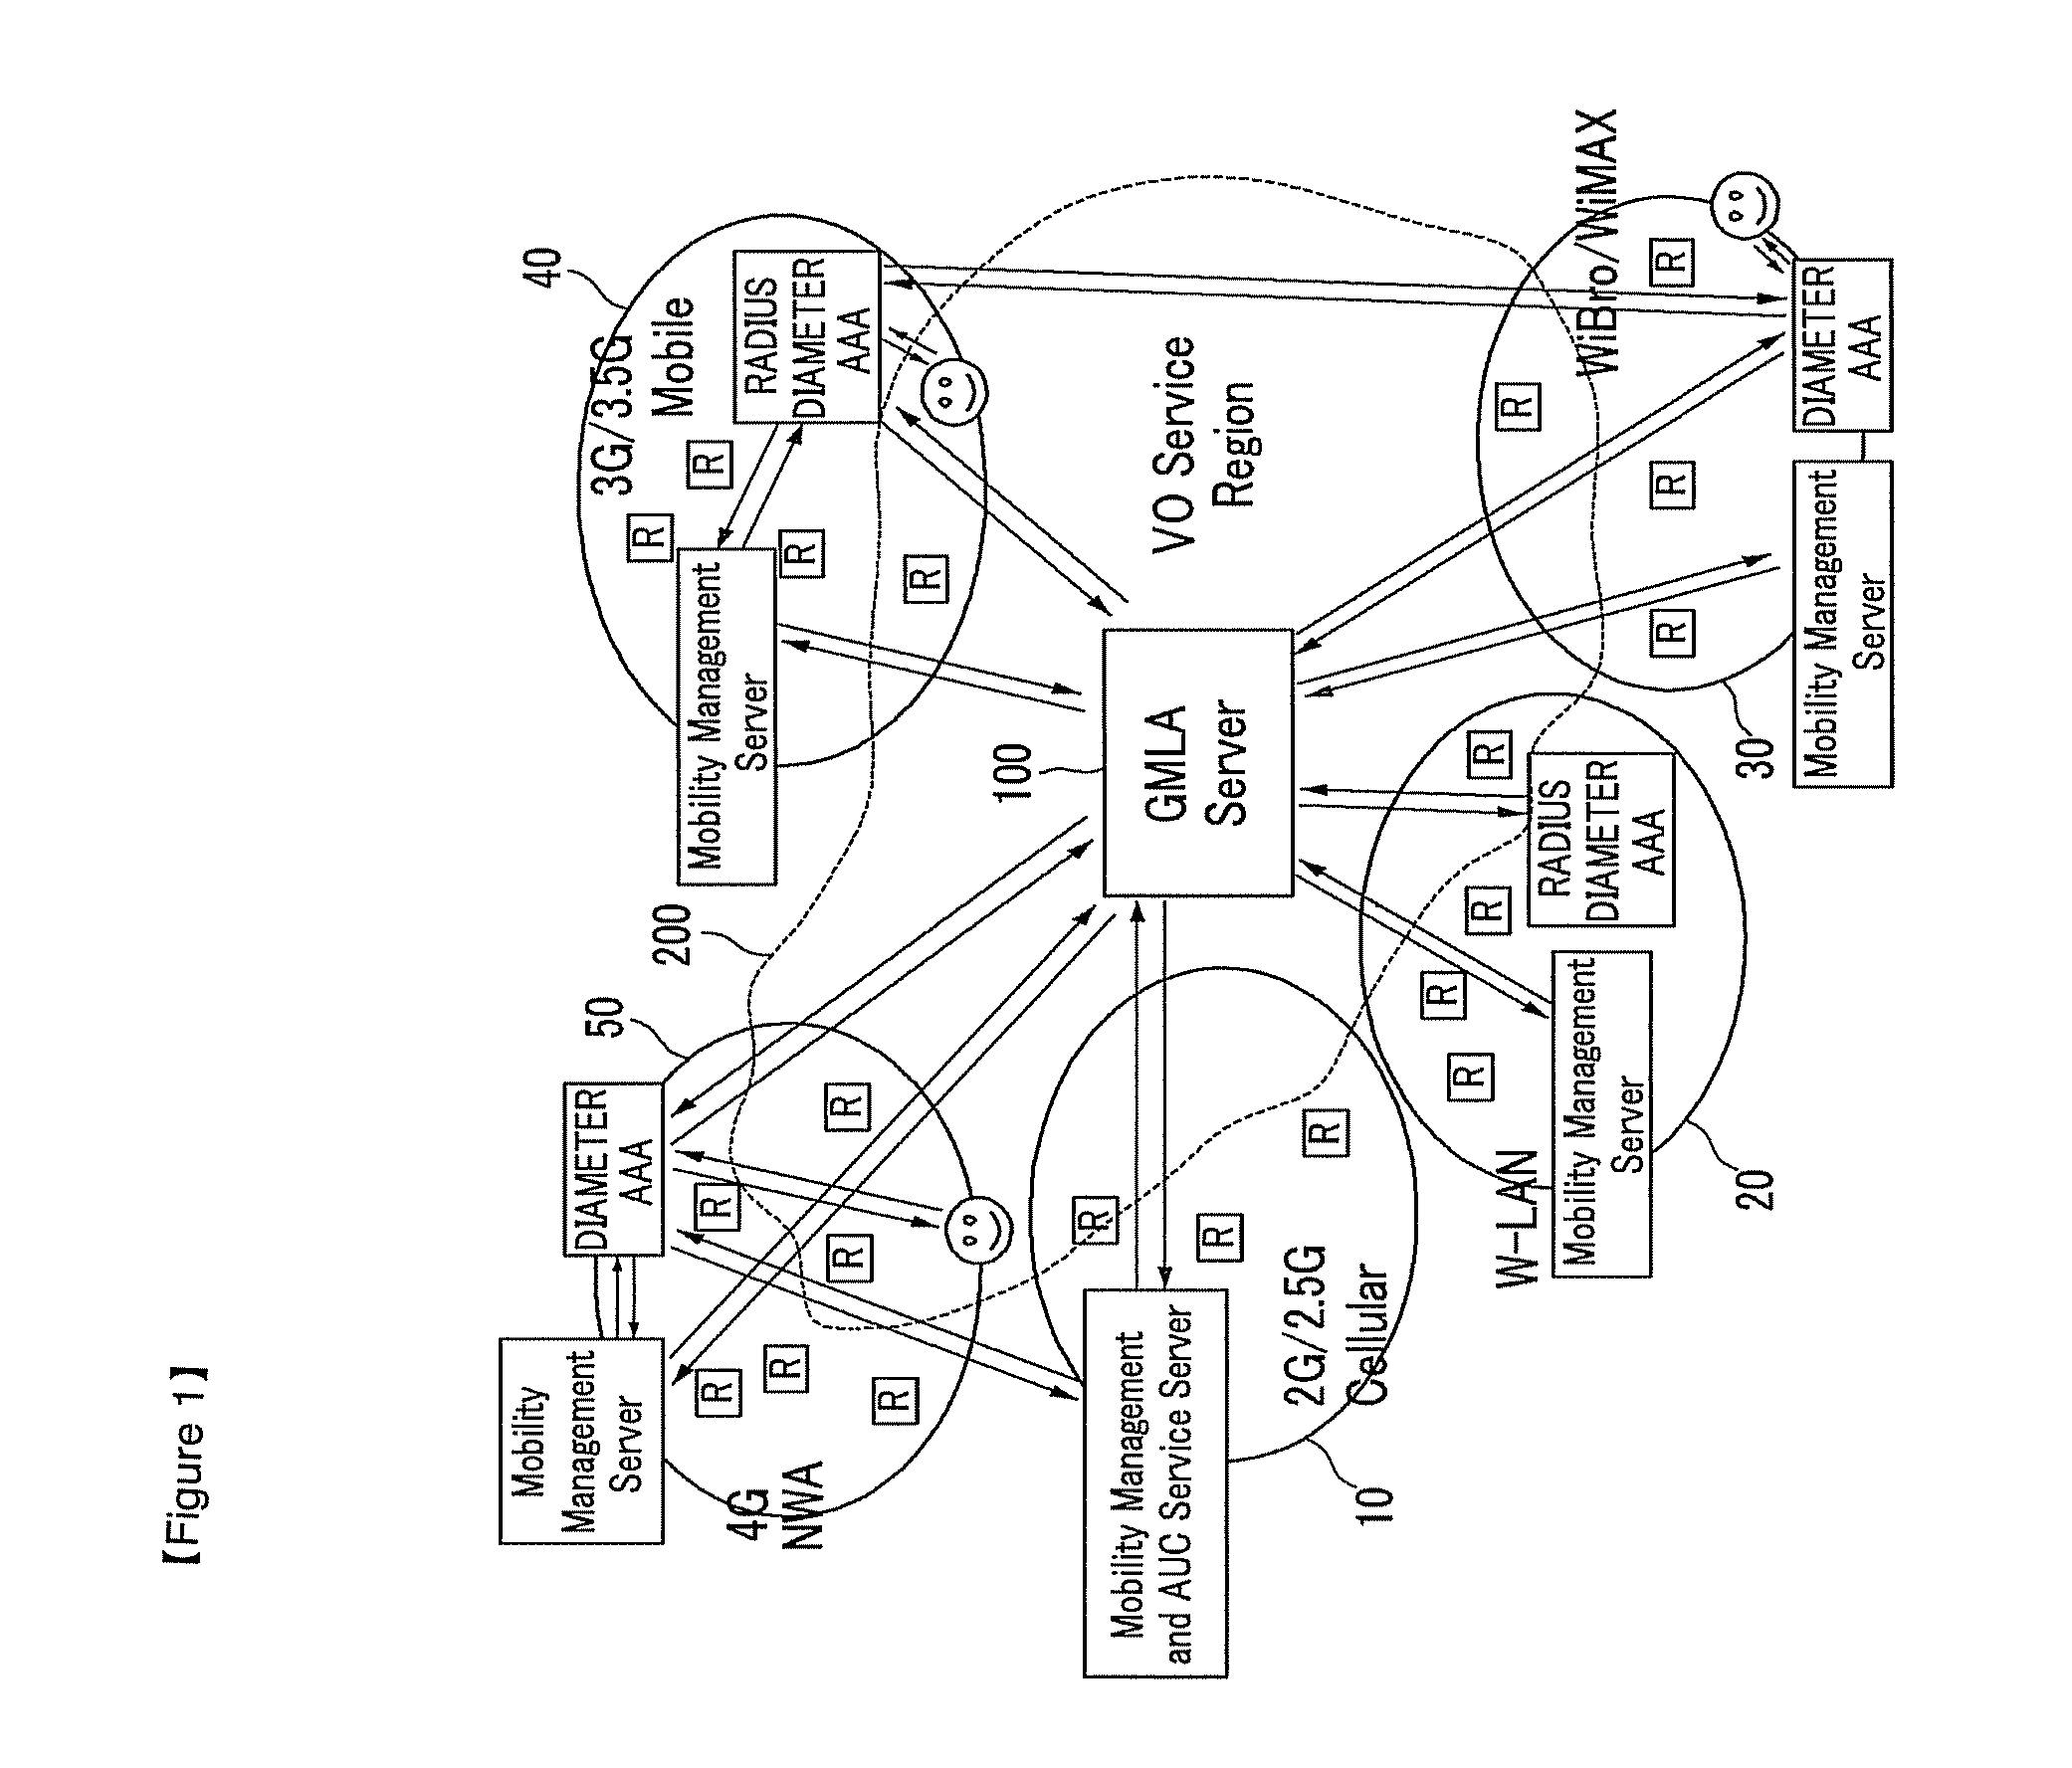 Collaboration system and method among heterogeneous nomadic and mobile communication networks using grid services